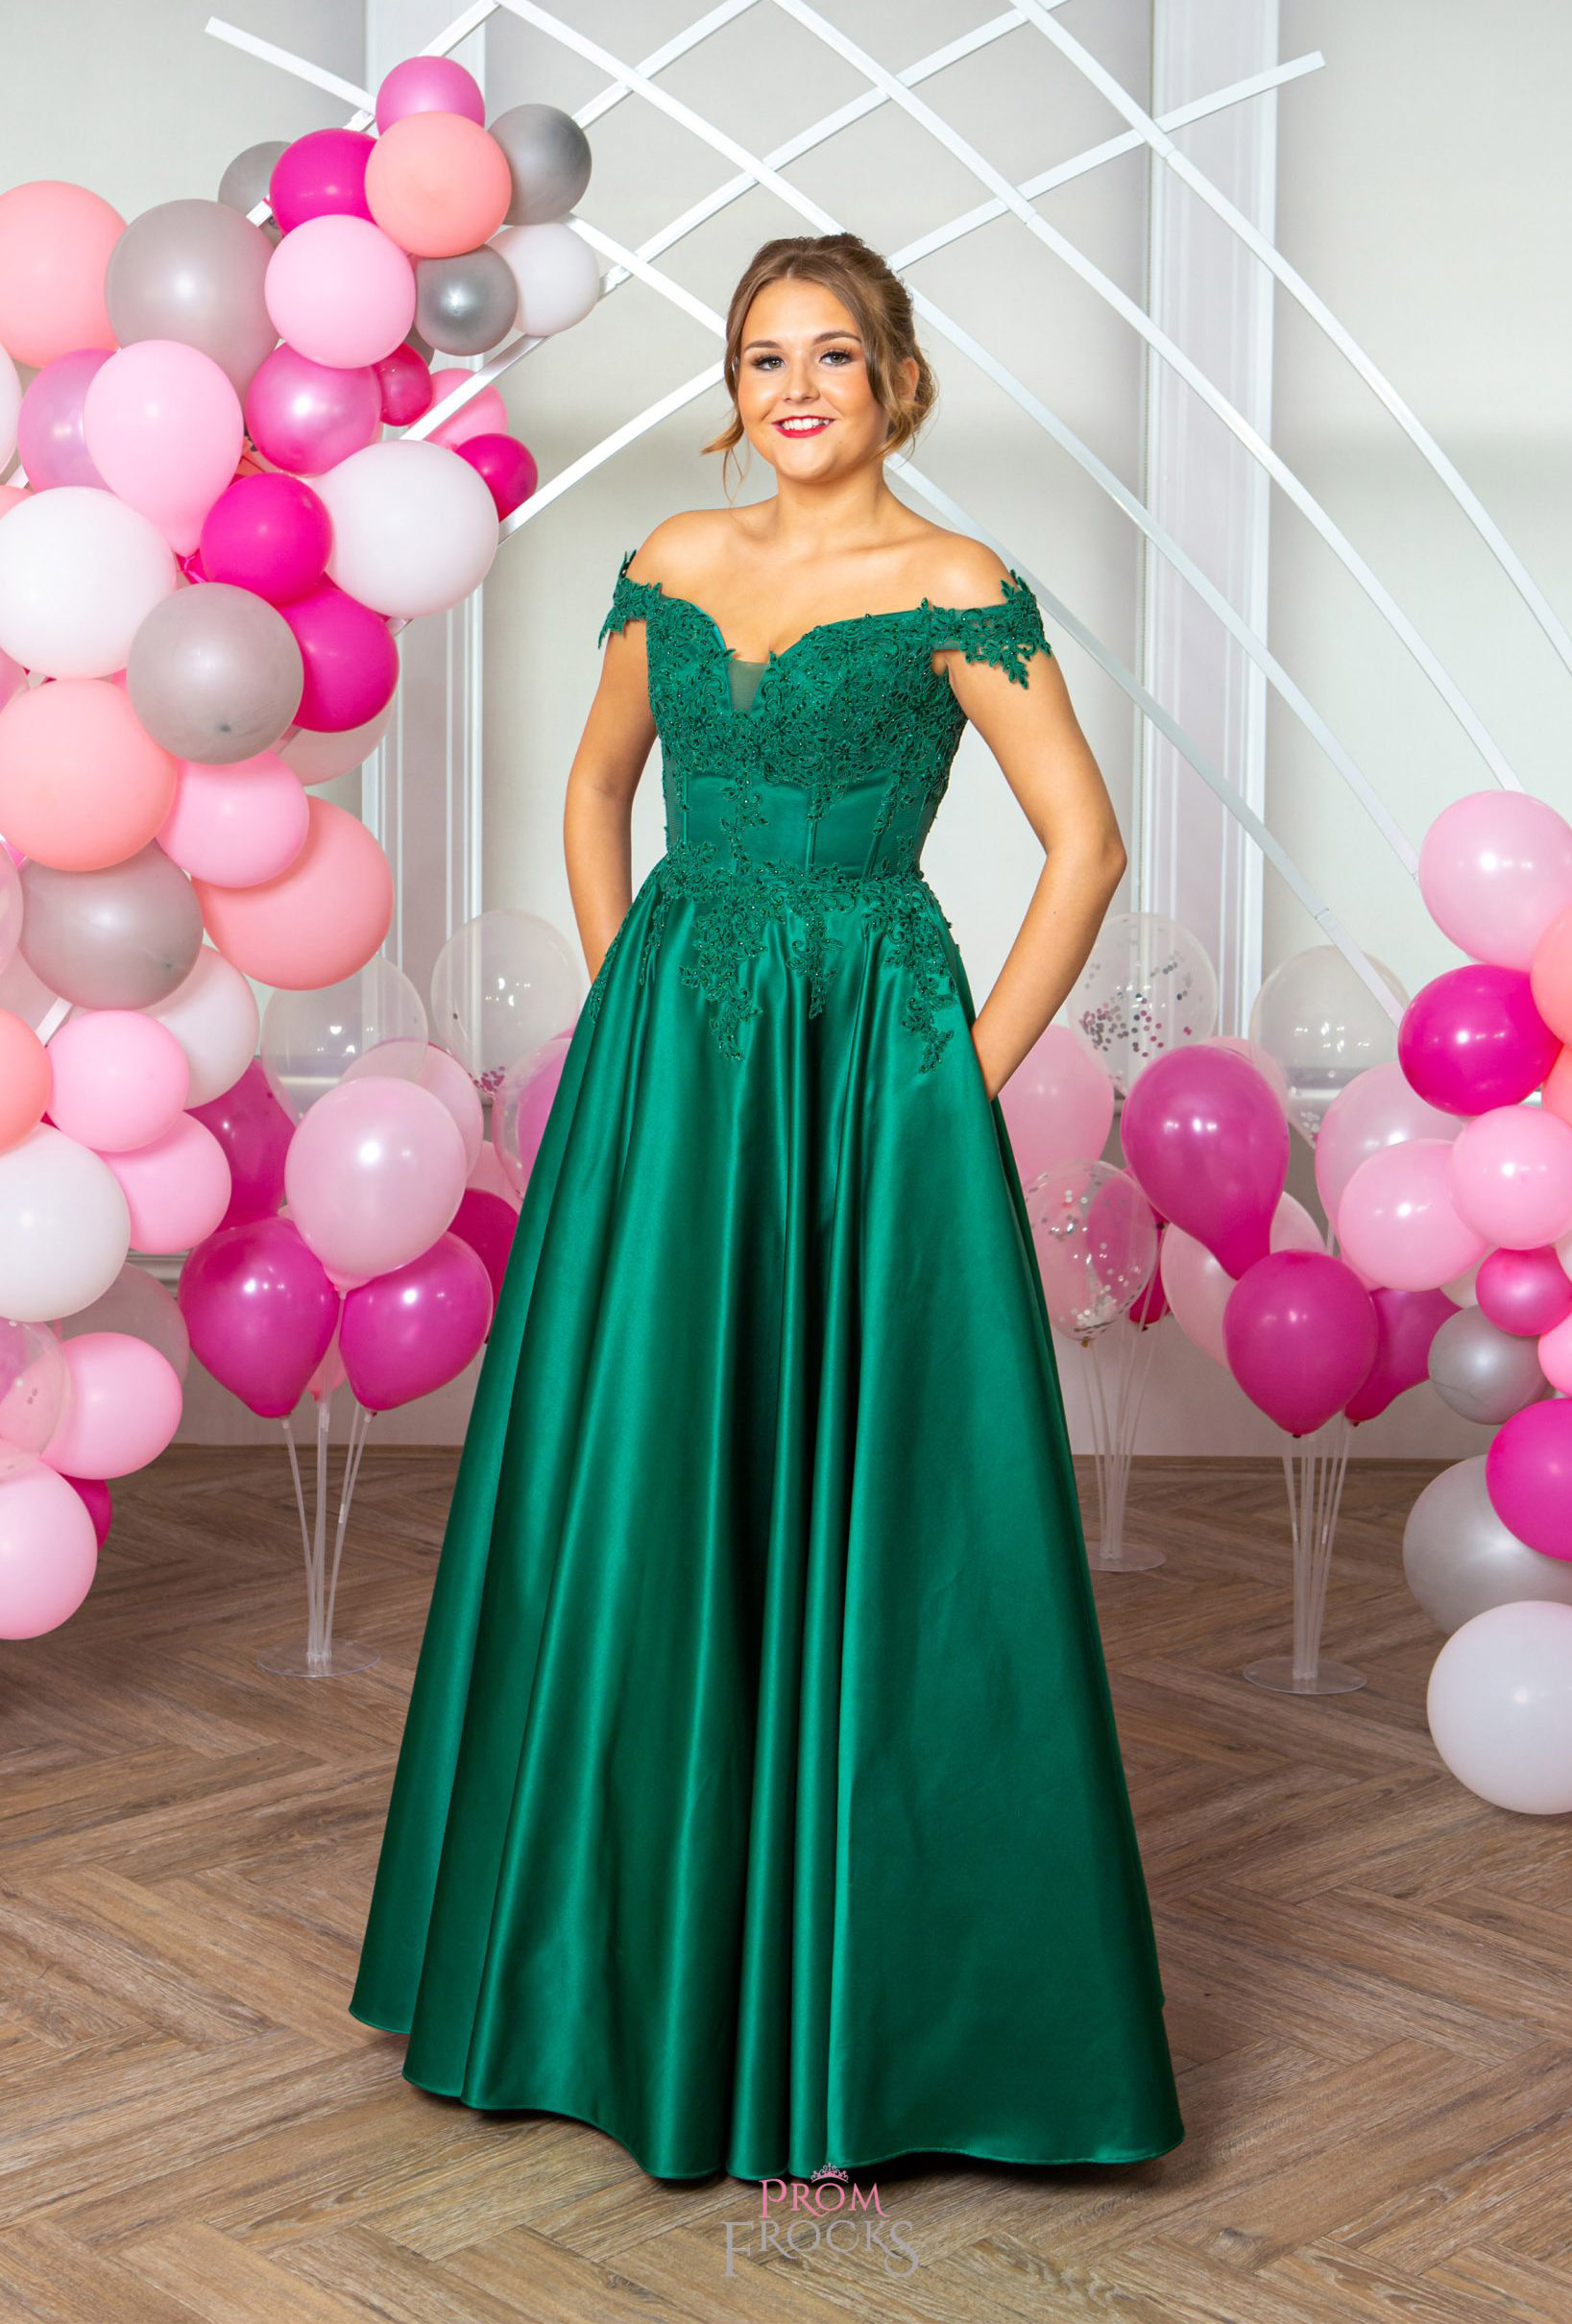 The front view of festive Francesca dress combining elegance with flair in vibrant Emerald green